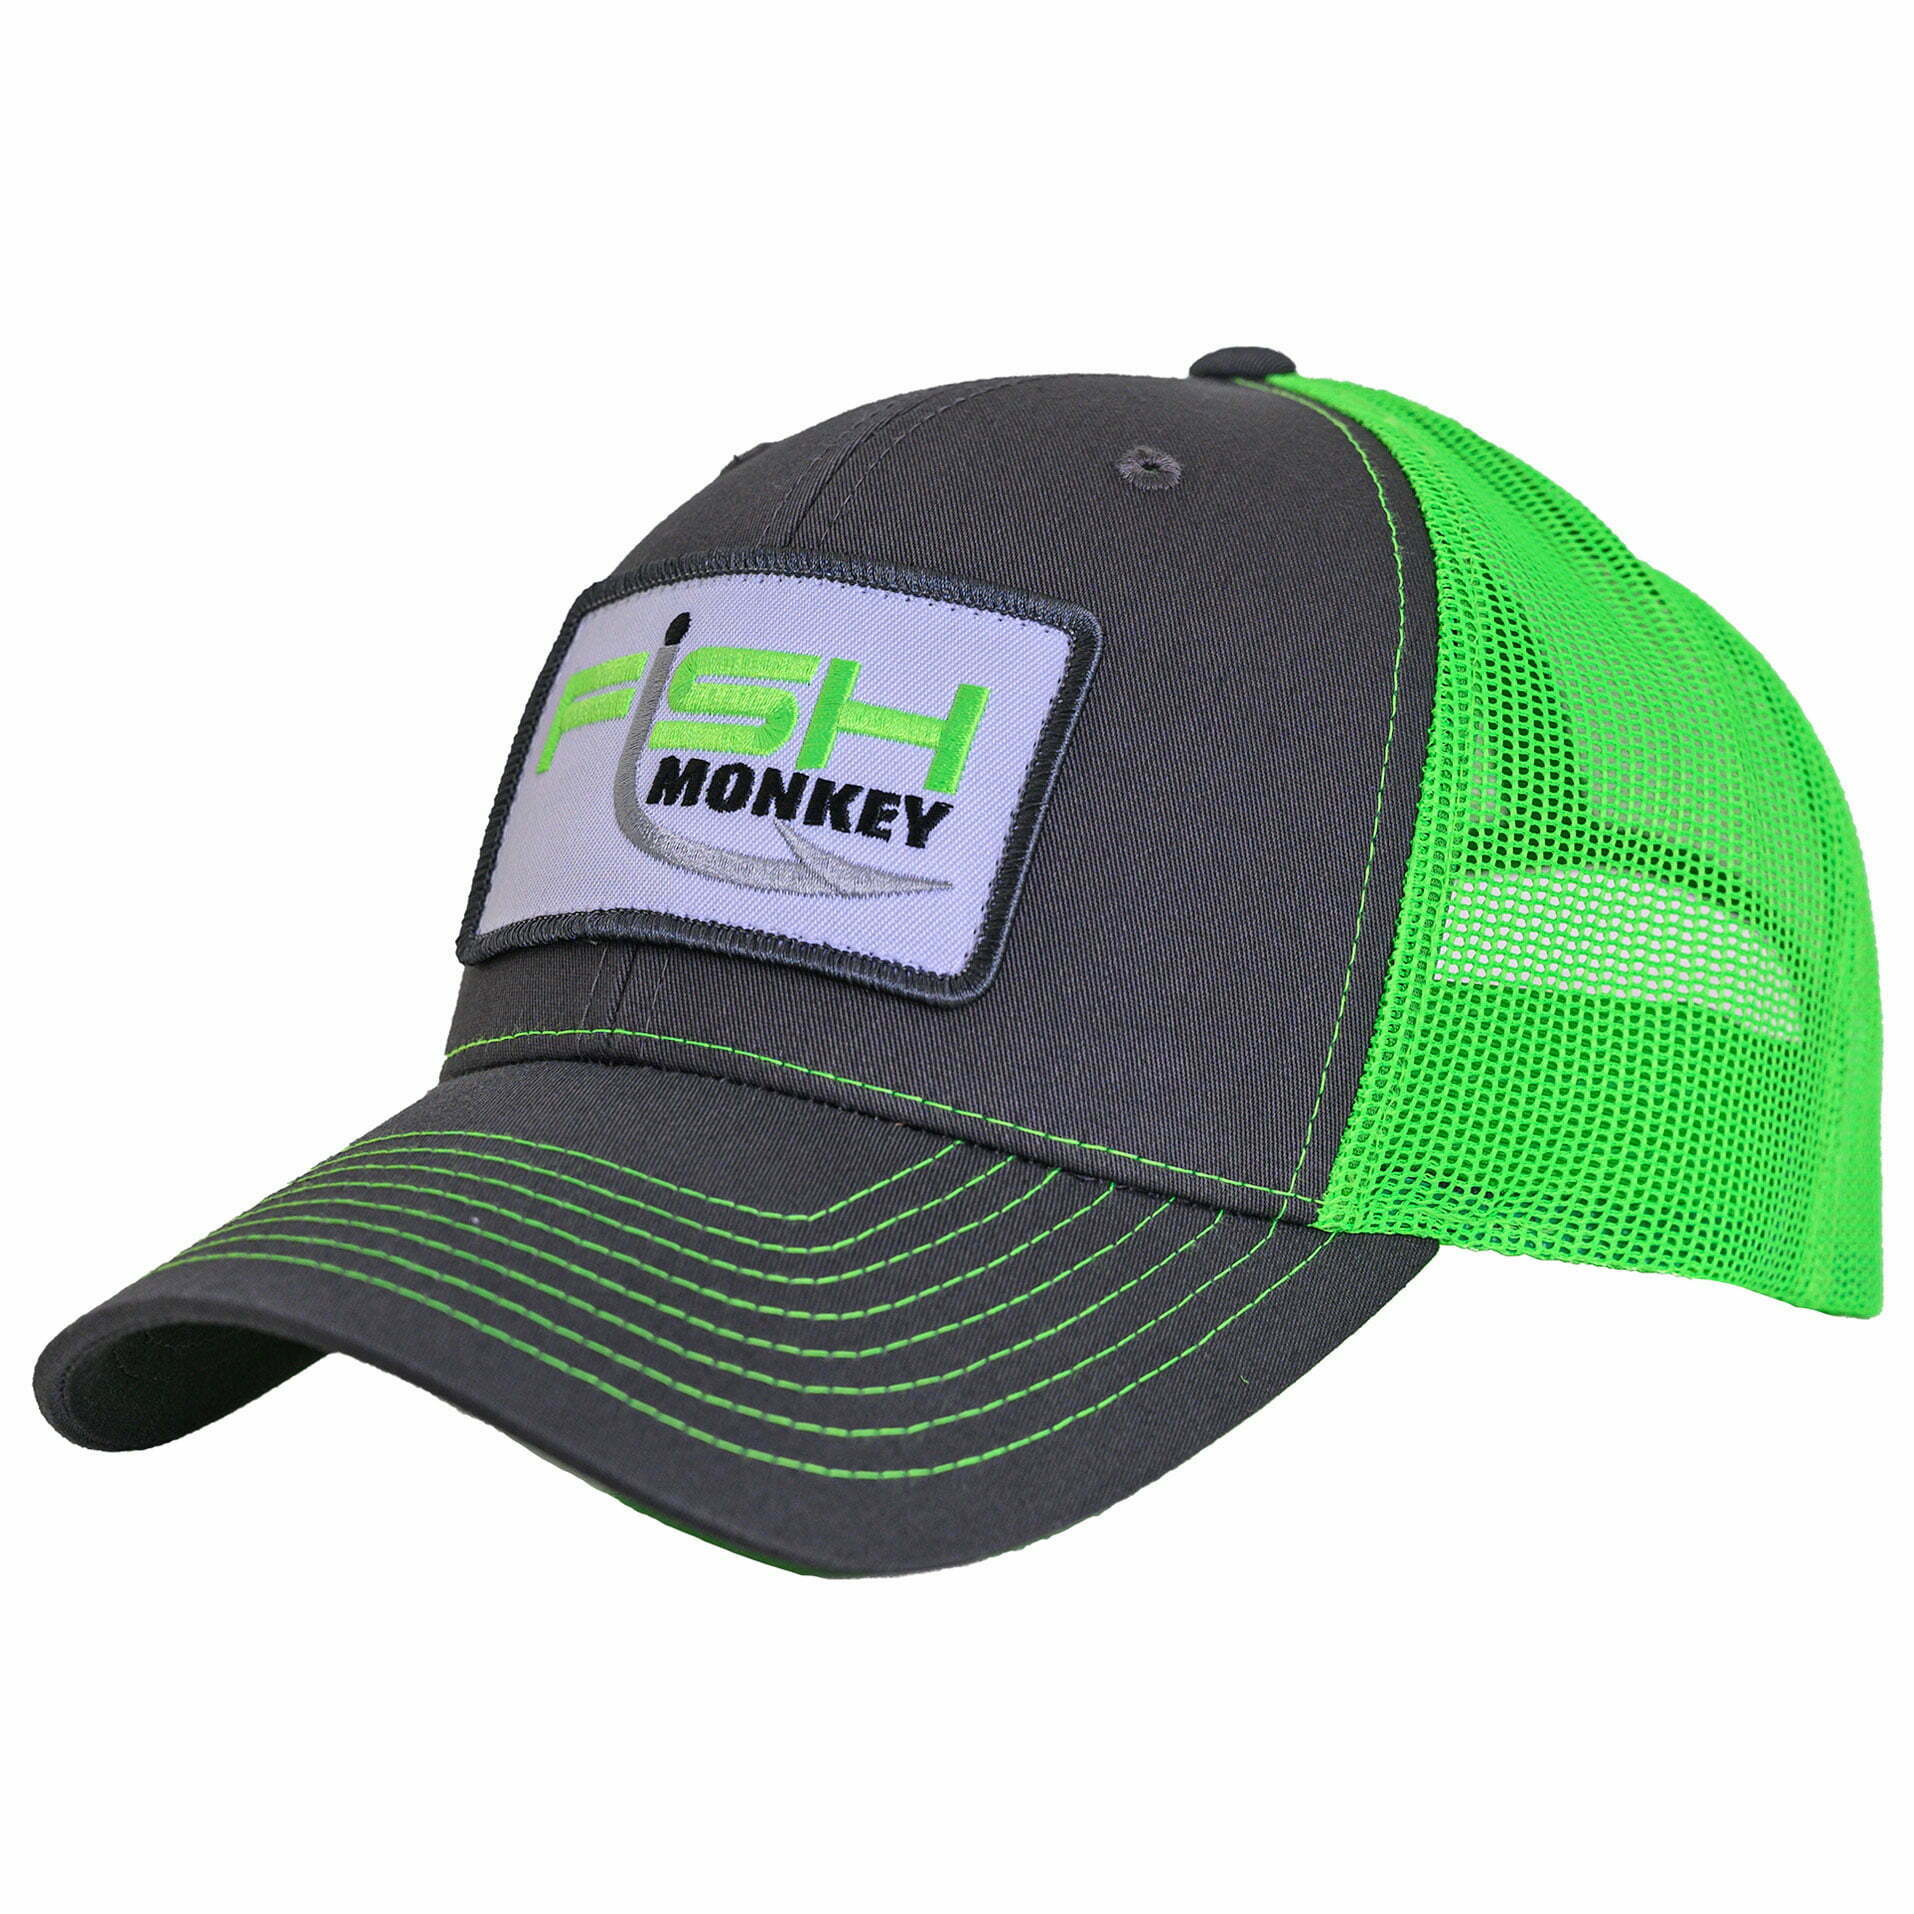 Buy mr-patch-charcoal-green FISH MONKEY HATS